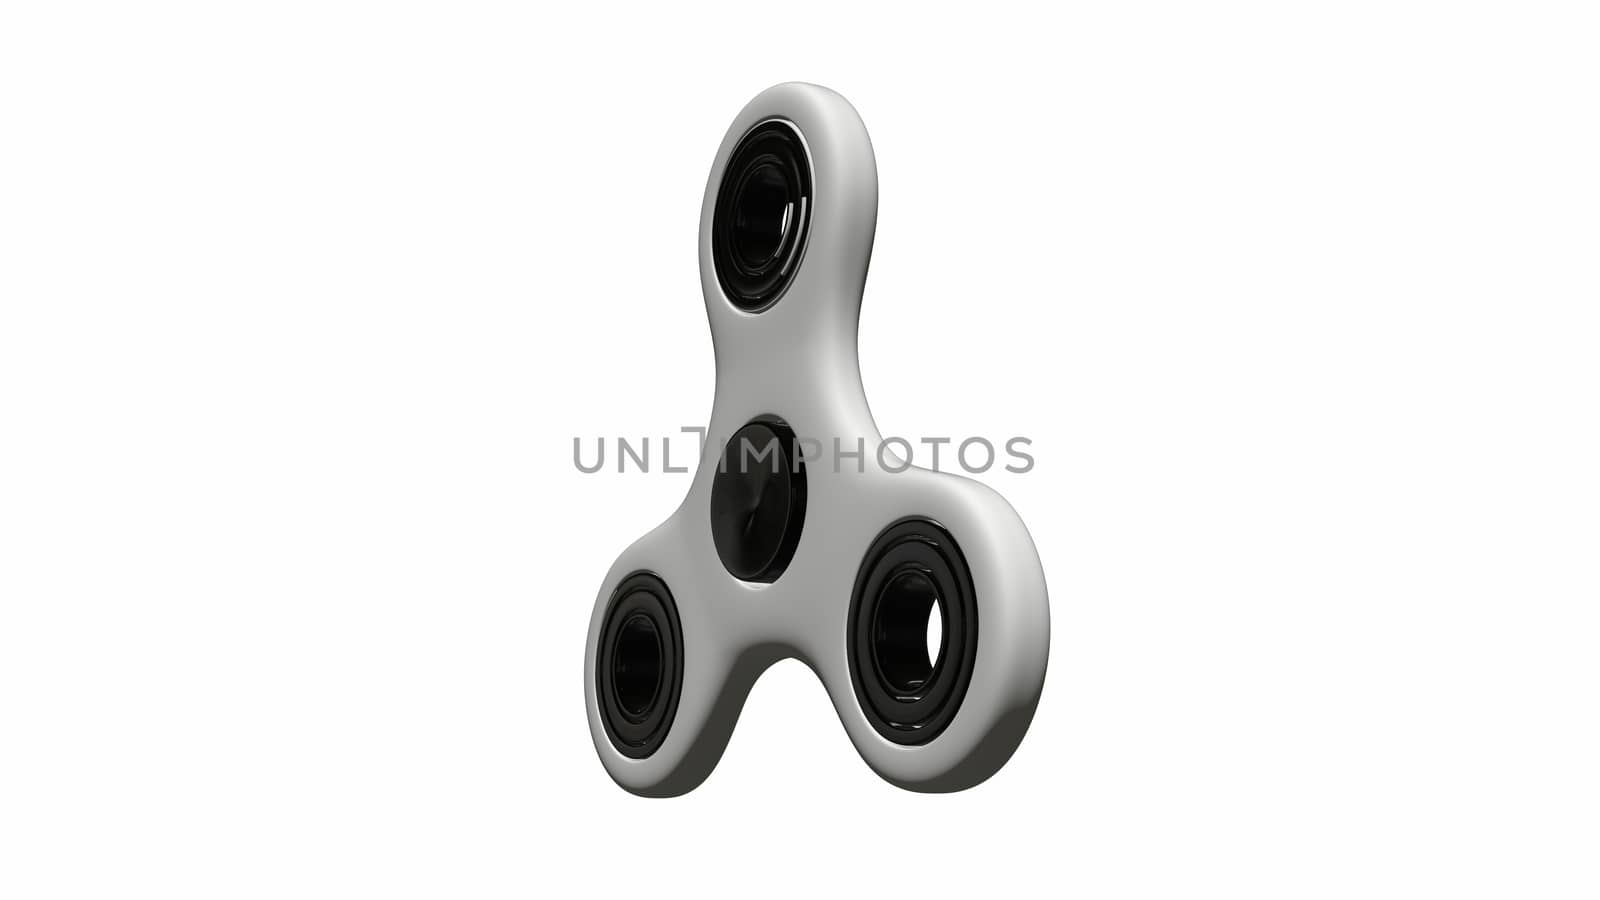 Abstract background with isolated hand spinner by nolimit046